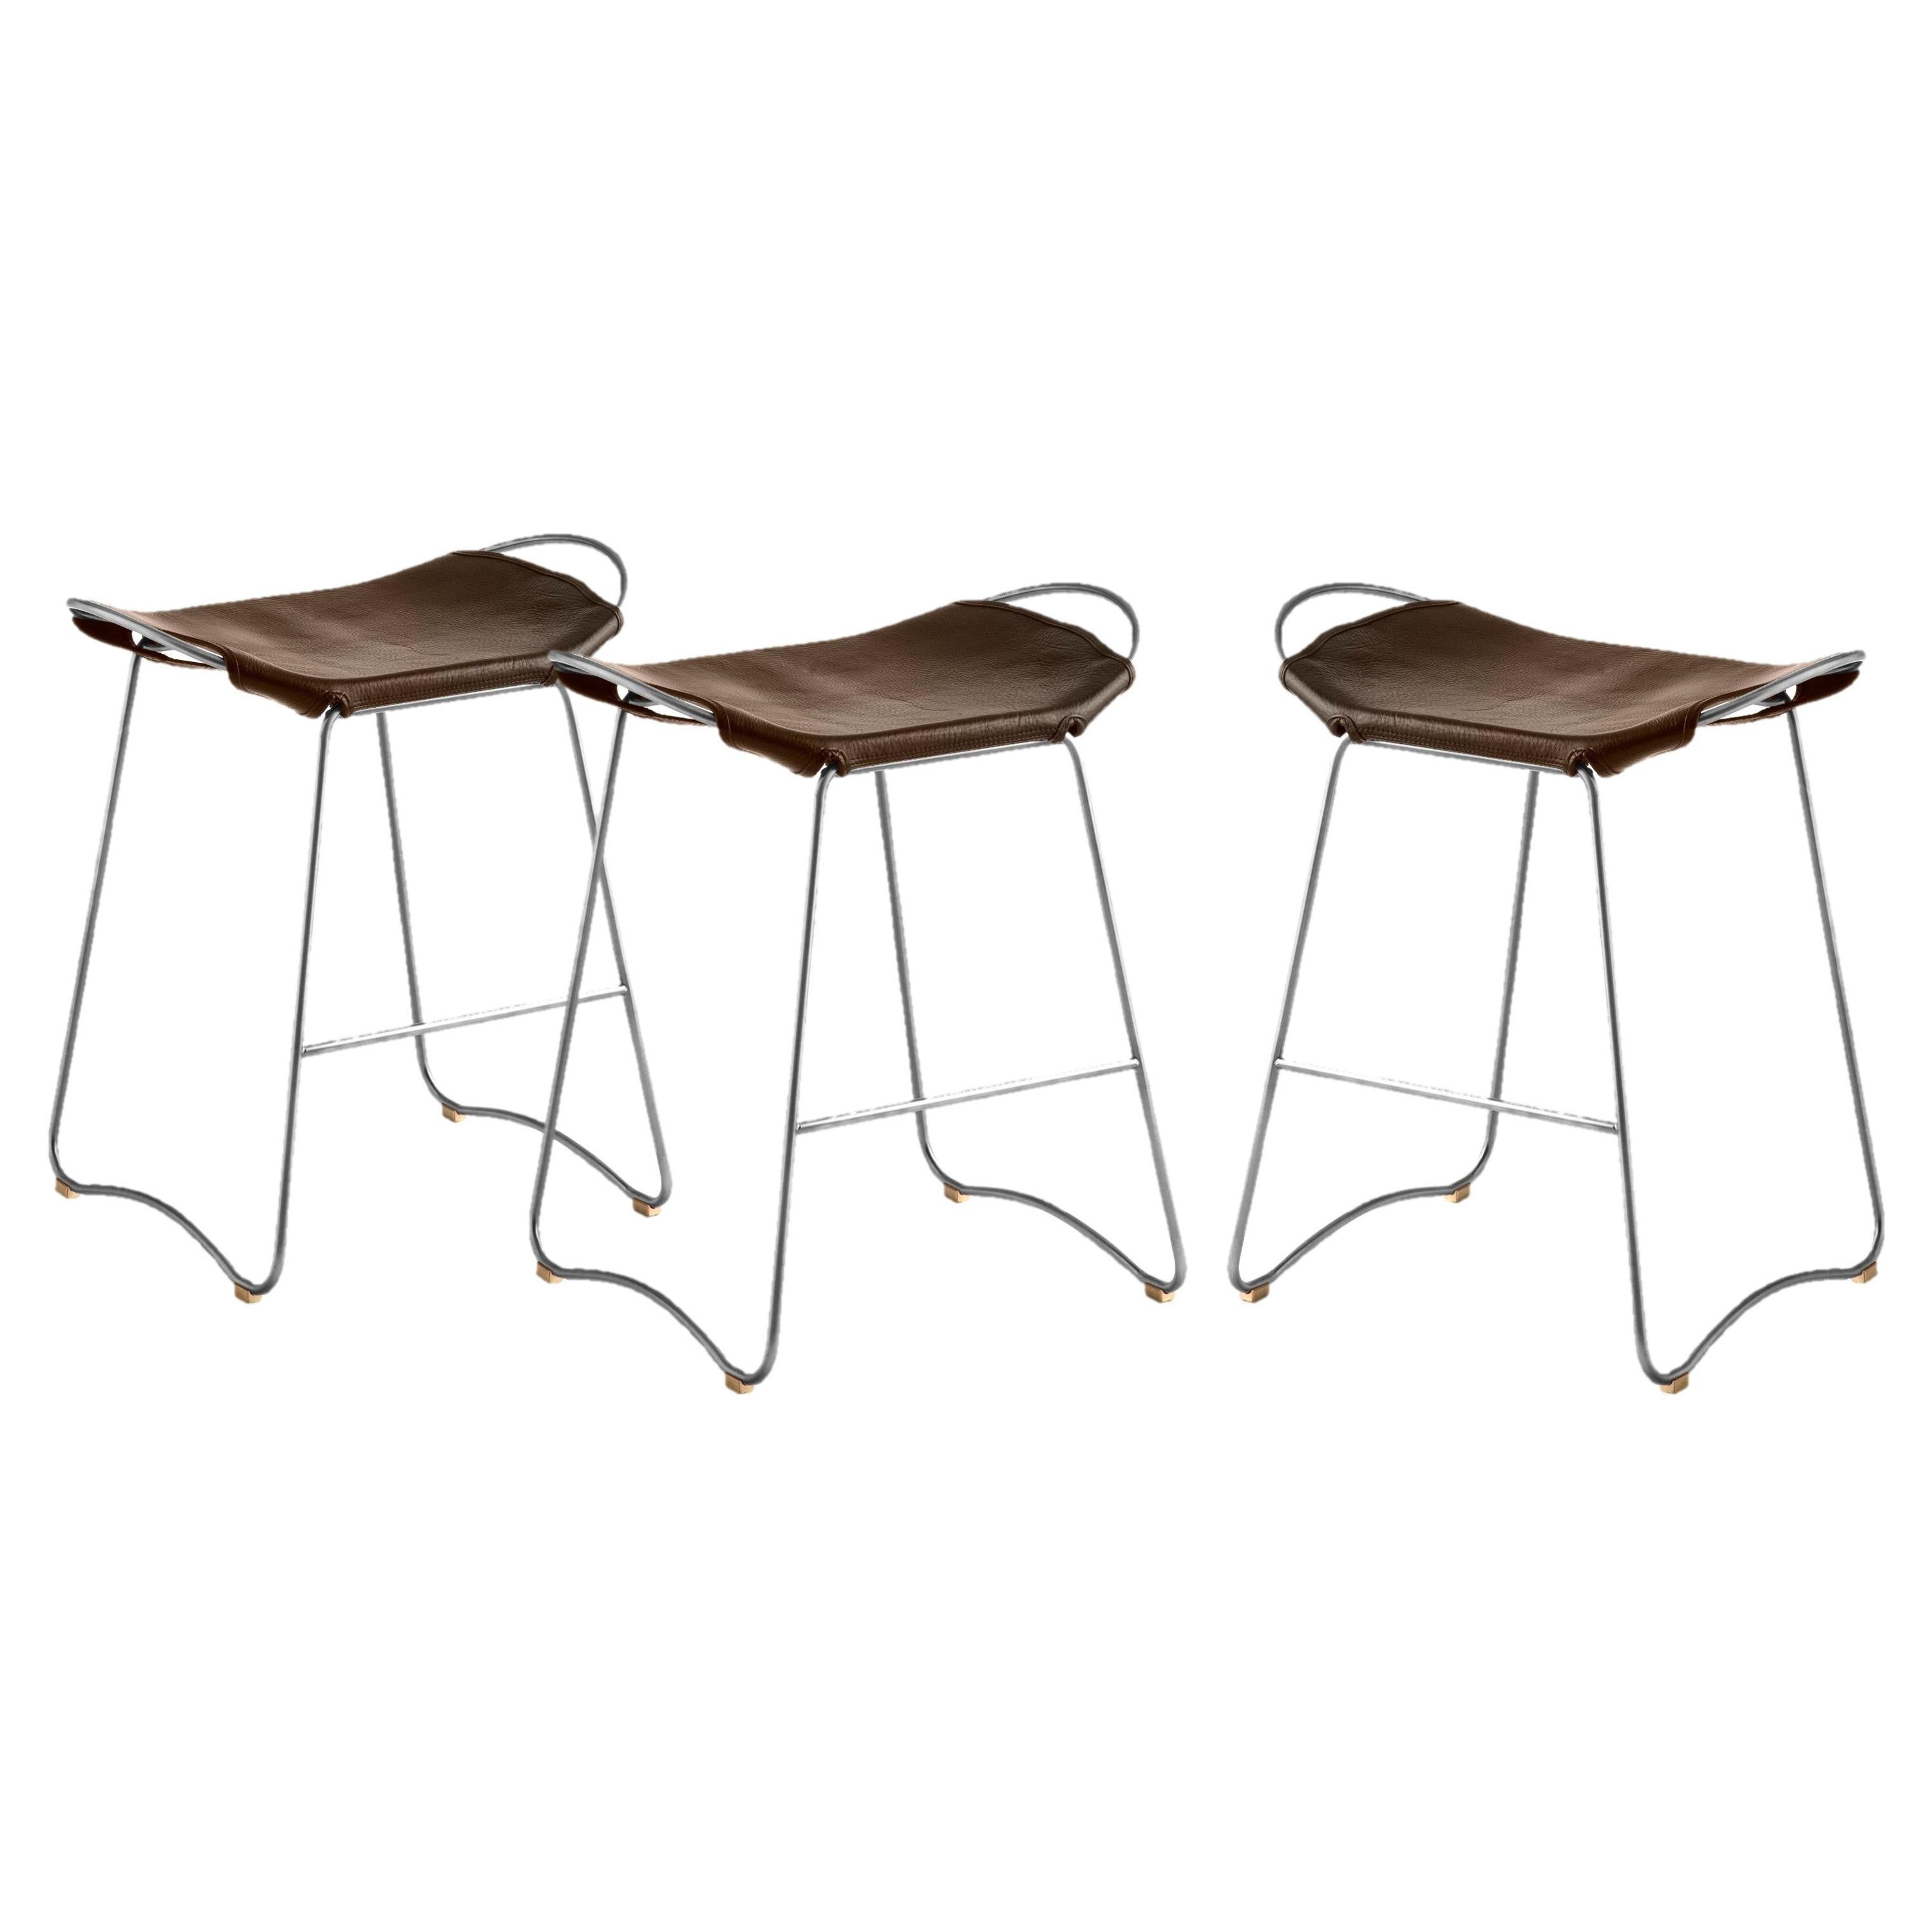 Set of 3 Organic Contemporary Bar Stool Old Silver Metal & Dark Brown Leather For Sale